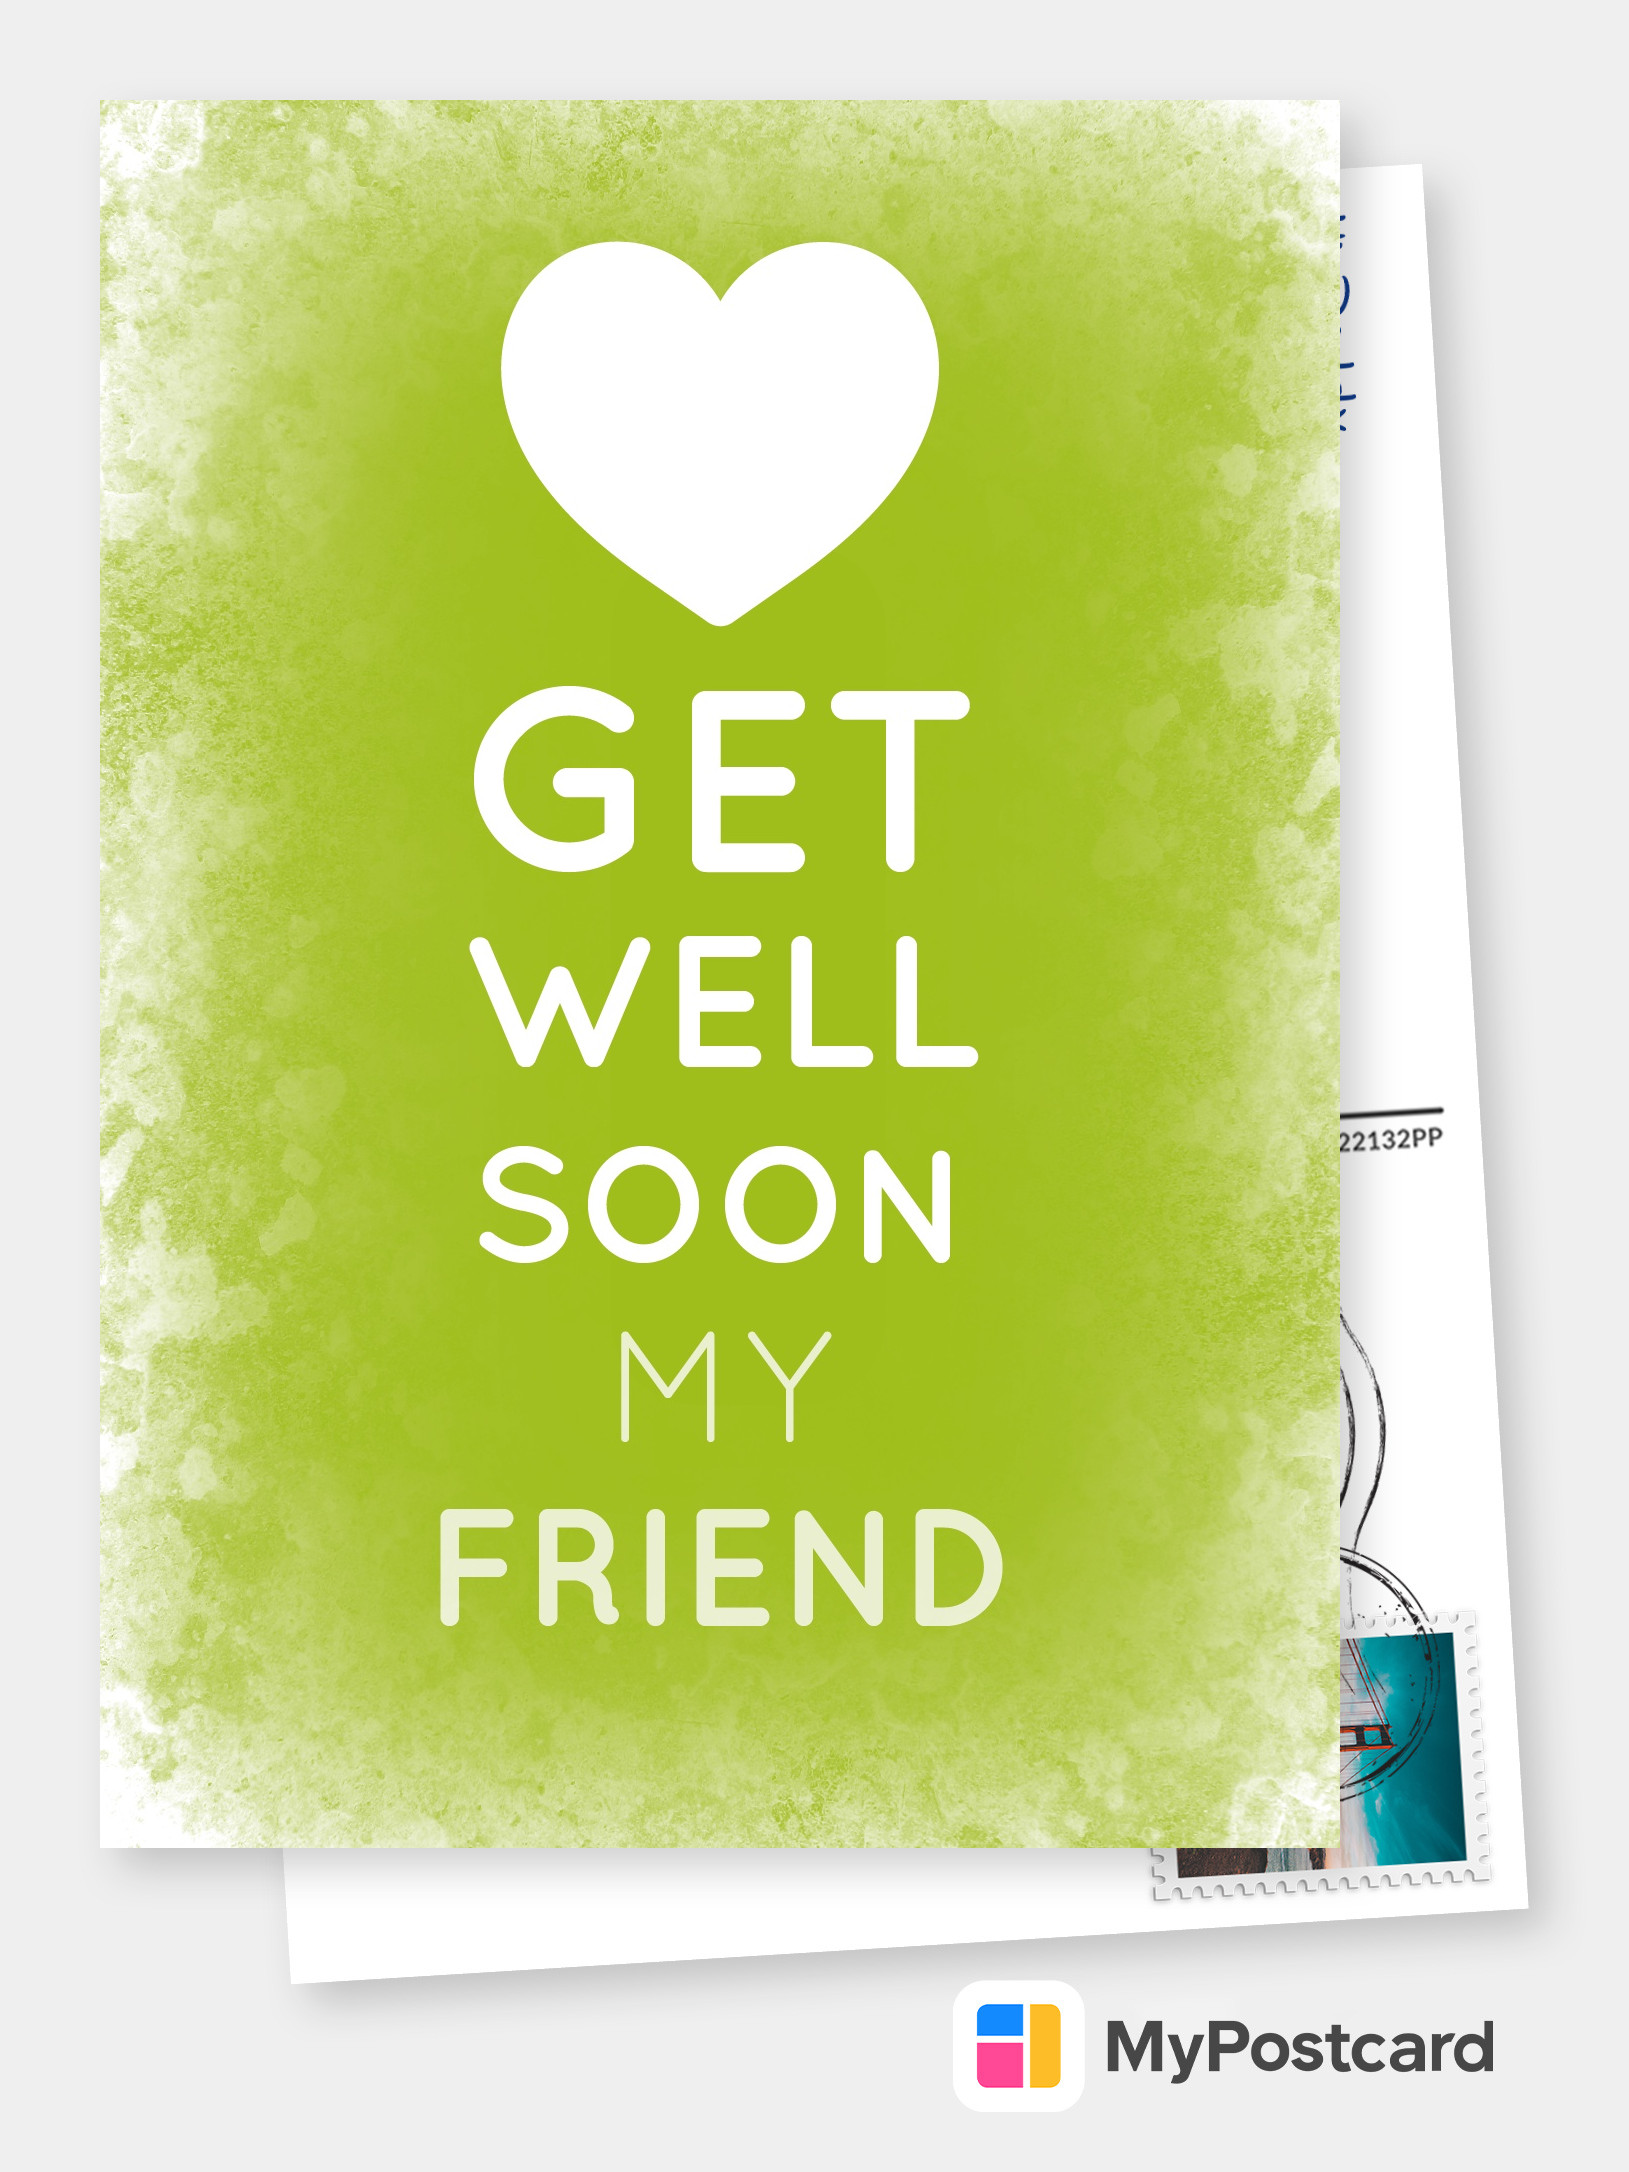 Create Your Own Get well soon Cards  Free Printable Templates  Printed &  Mailed For You  Send Your Get well soon Cards Online  Free shipping With Regard To Get Well Card Template